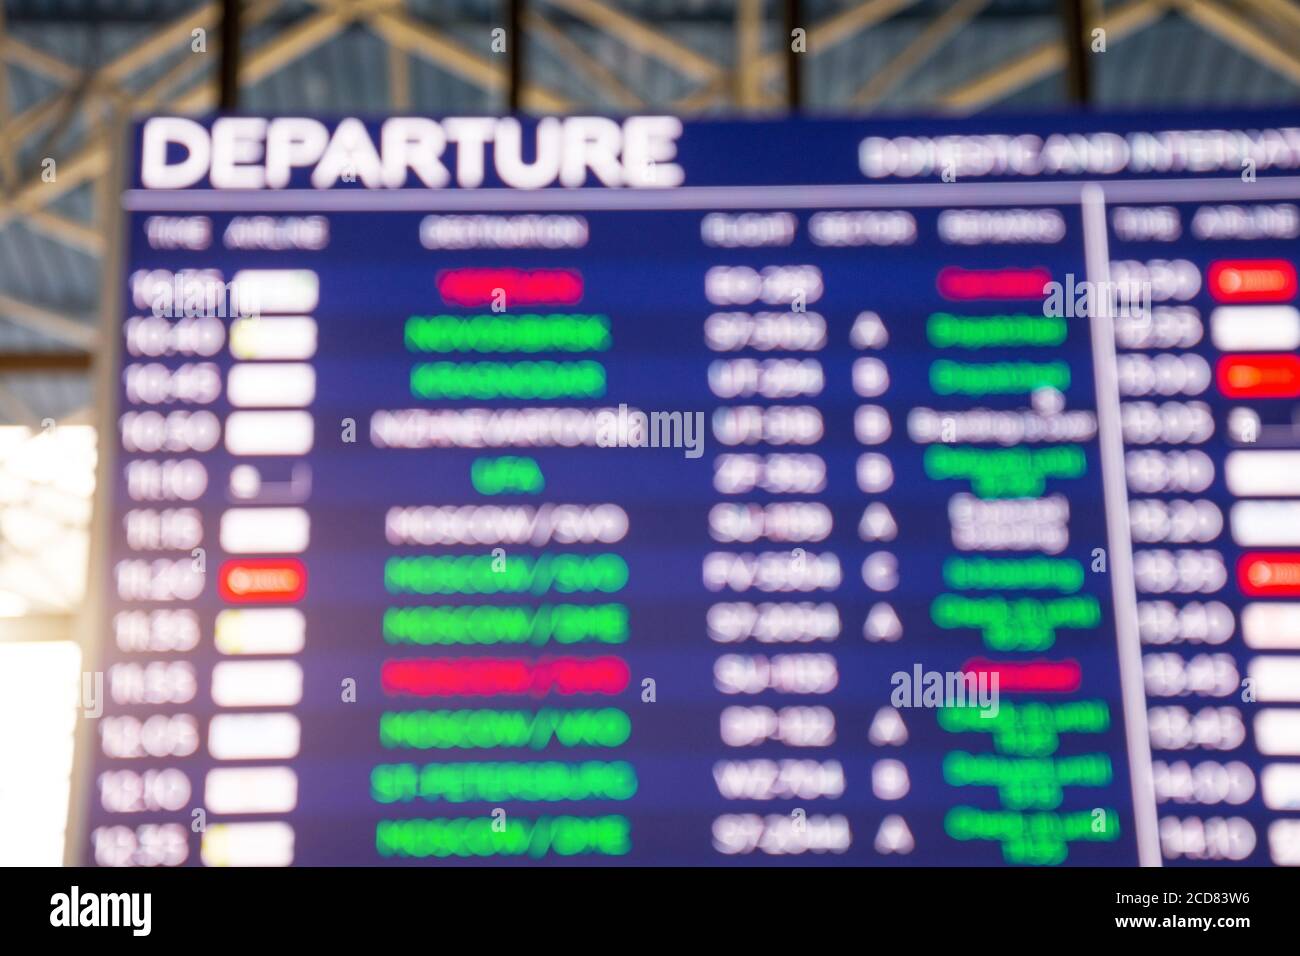 Airport departure board, view out of focus Stock Photo